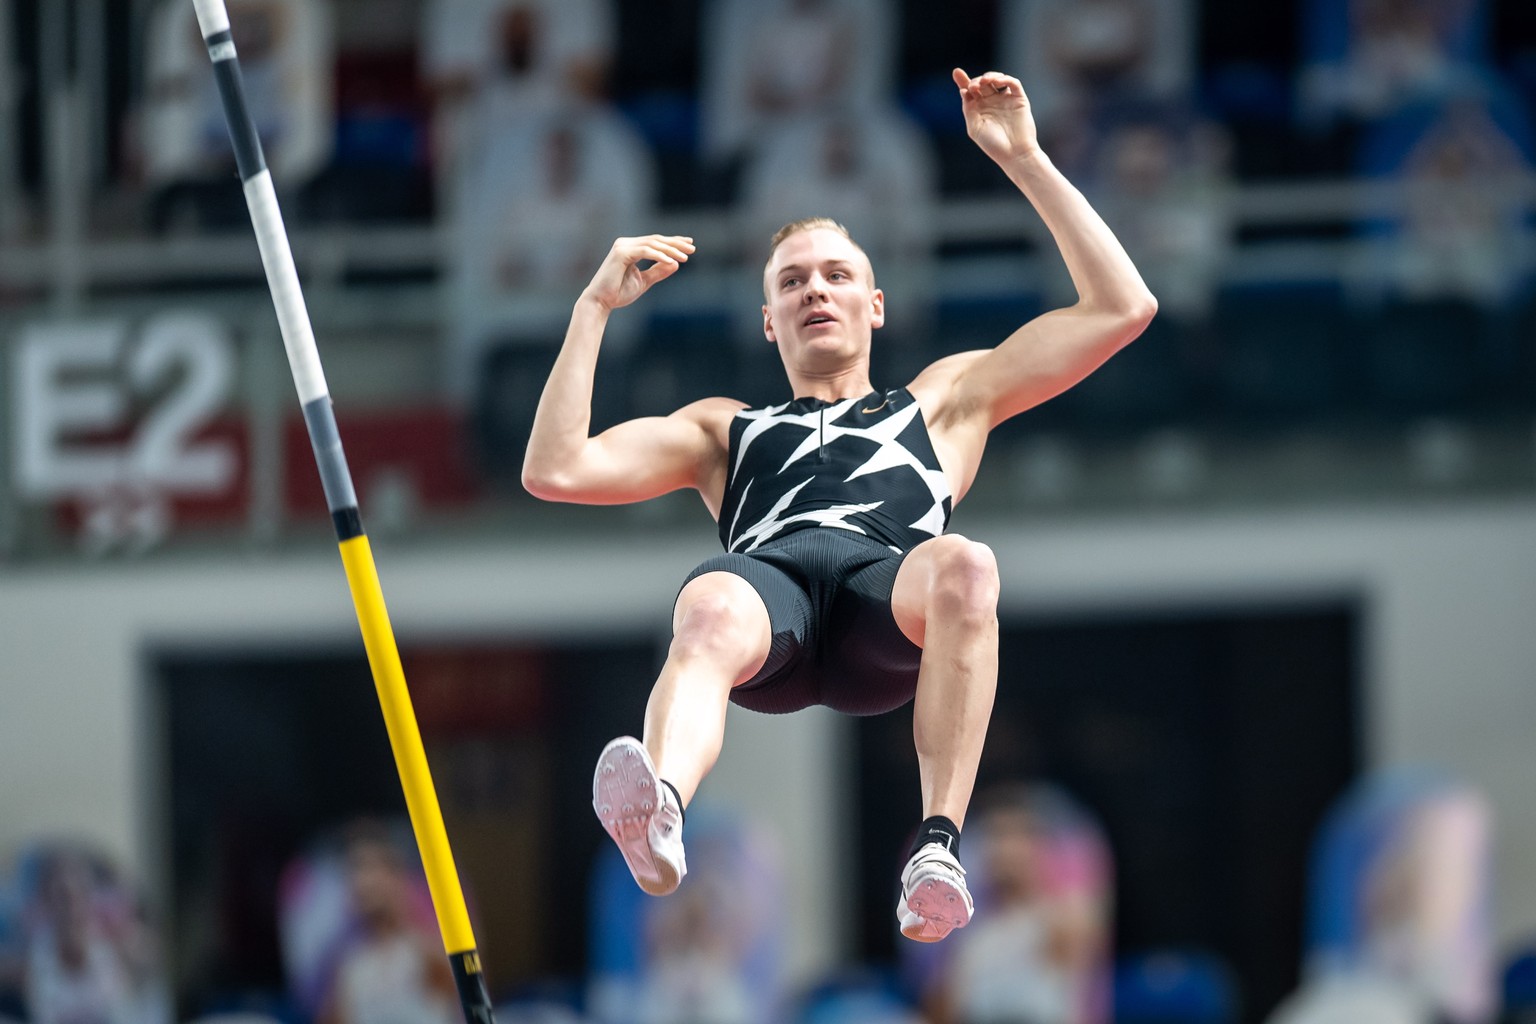 epa09019910 Sam Kendricks of the USA competes in the men&#039;s Pole Vault during the Copernicus Cup 2021 indoor athletics meeting in Torun, Poland, 17 February 2021. EPA/Tytus Zmijewski POLAND OUT